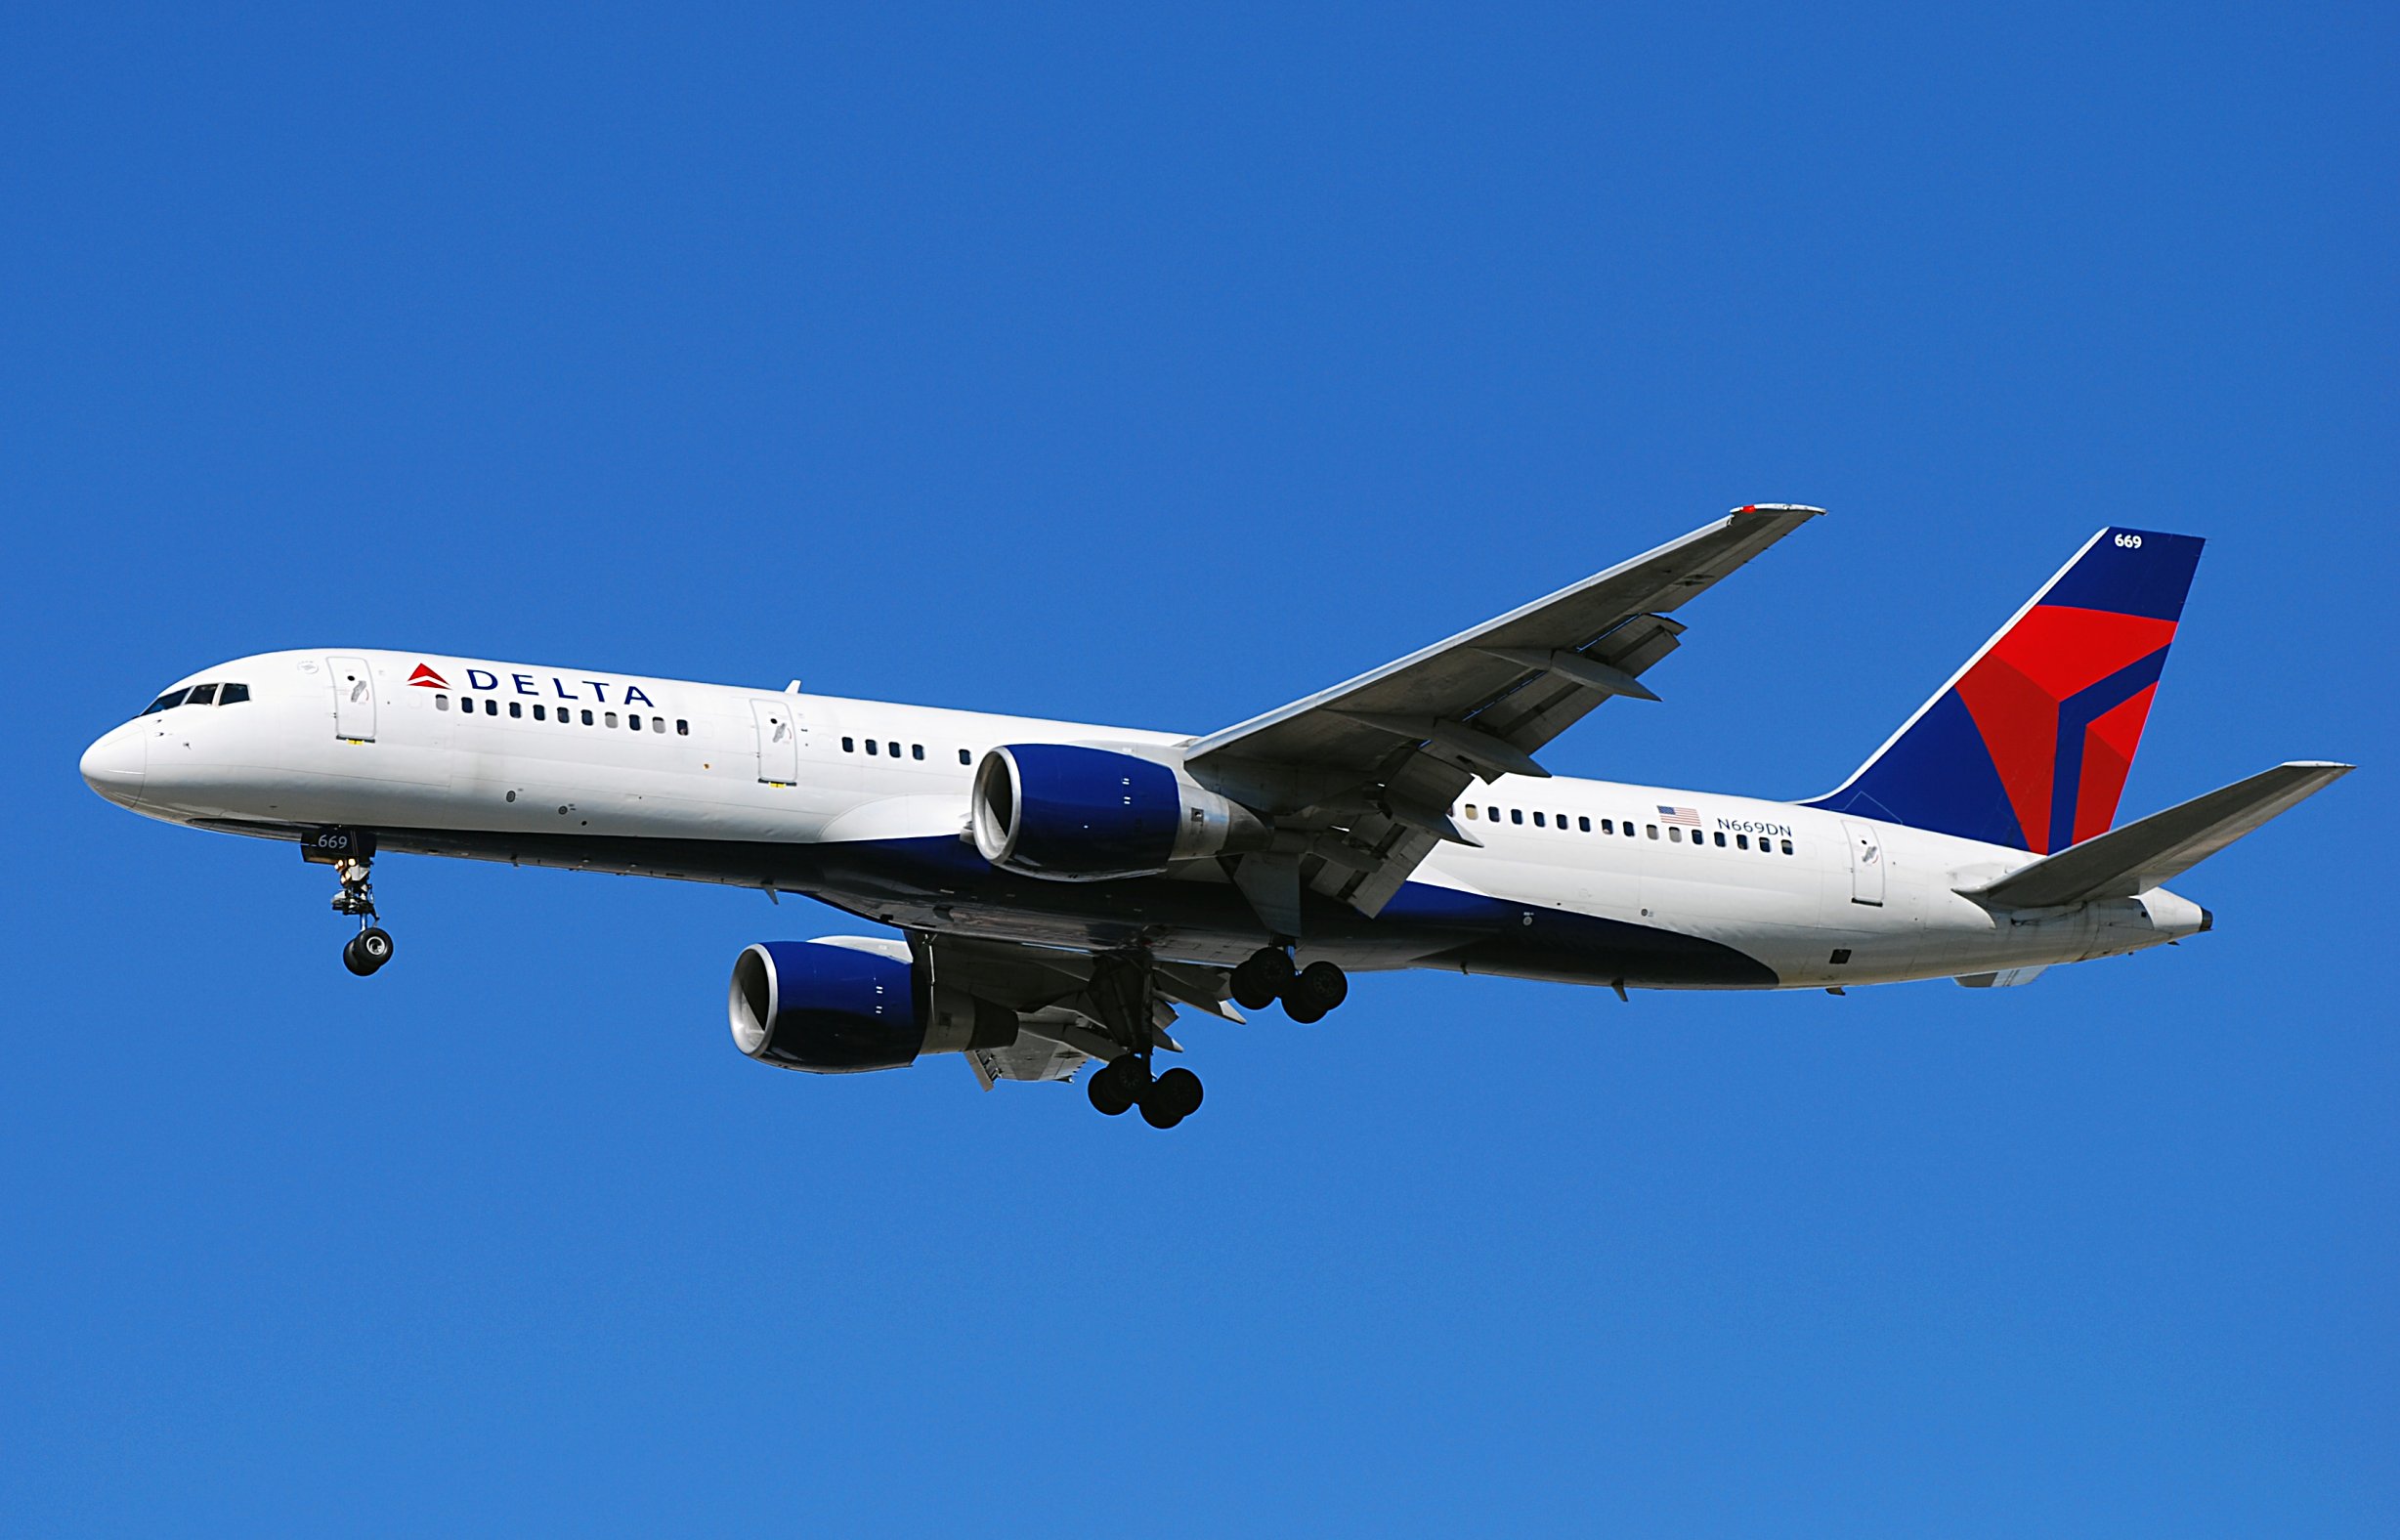 Di Tomás Del Coro from Las Vegas, Nevada, USA - Delta Air Lines Boeing 757-232 N669DN / 669 (cn 25142/377), CC BY-SA 2.0, https://commons.wikimedia.org/w/index.php?curid=58253344